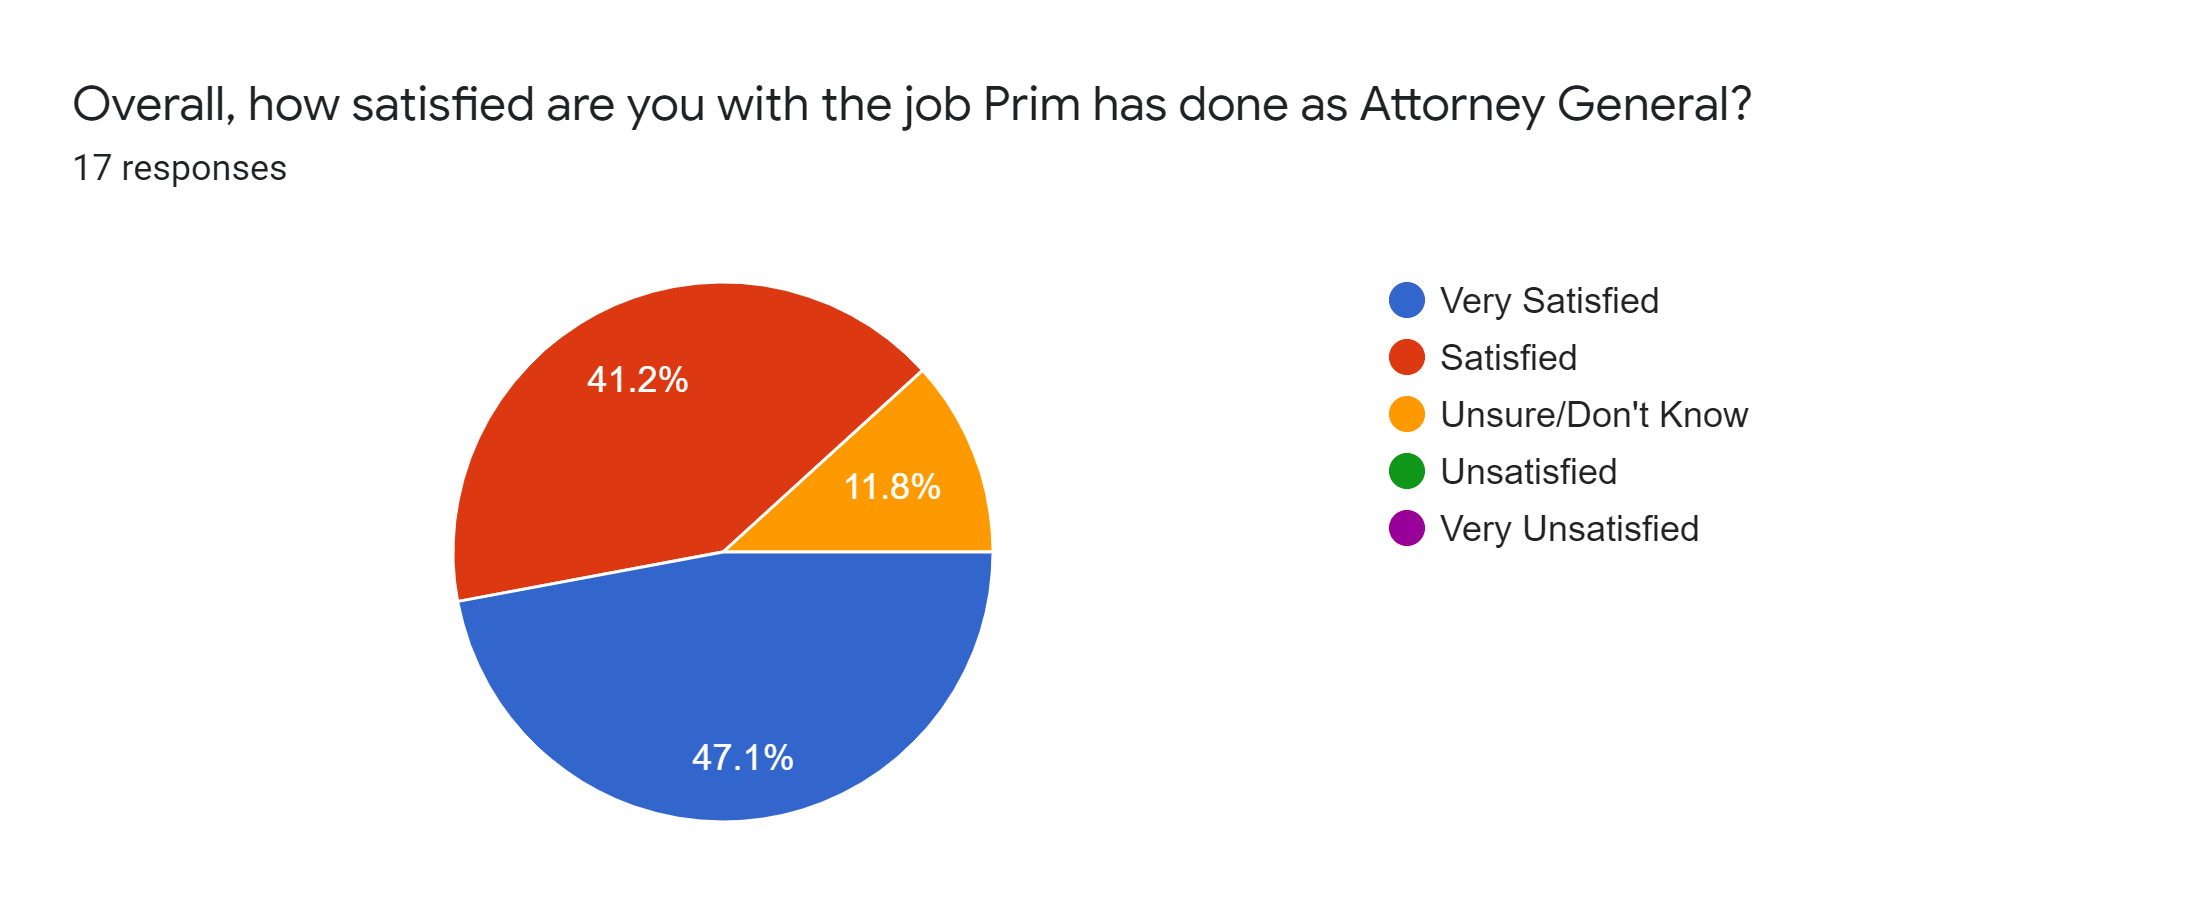 Forms response chart. Question title: Overall, how satisfied are you with the job Prim has done as Attorney General?. Number of responses: 17 responses.